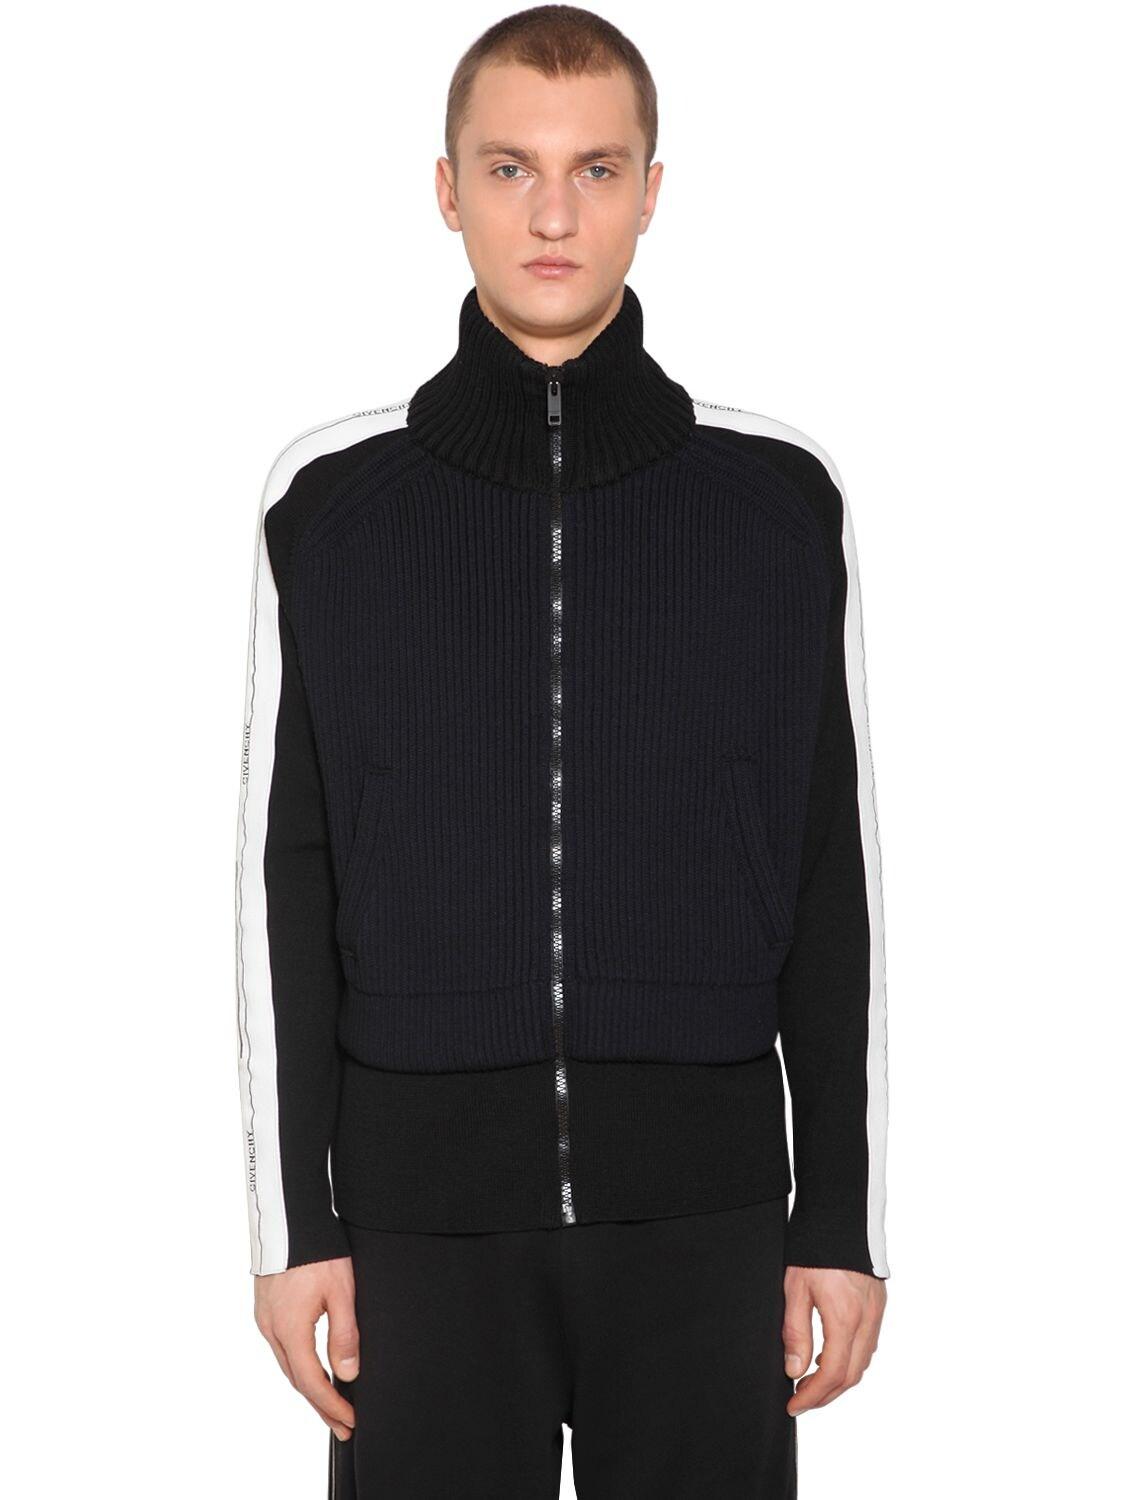 Givenchy Synthetic Zip Up Nylon Blend Knit Jacket in Black for Men - Lyst